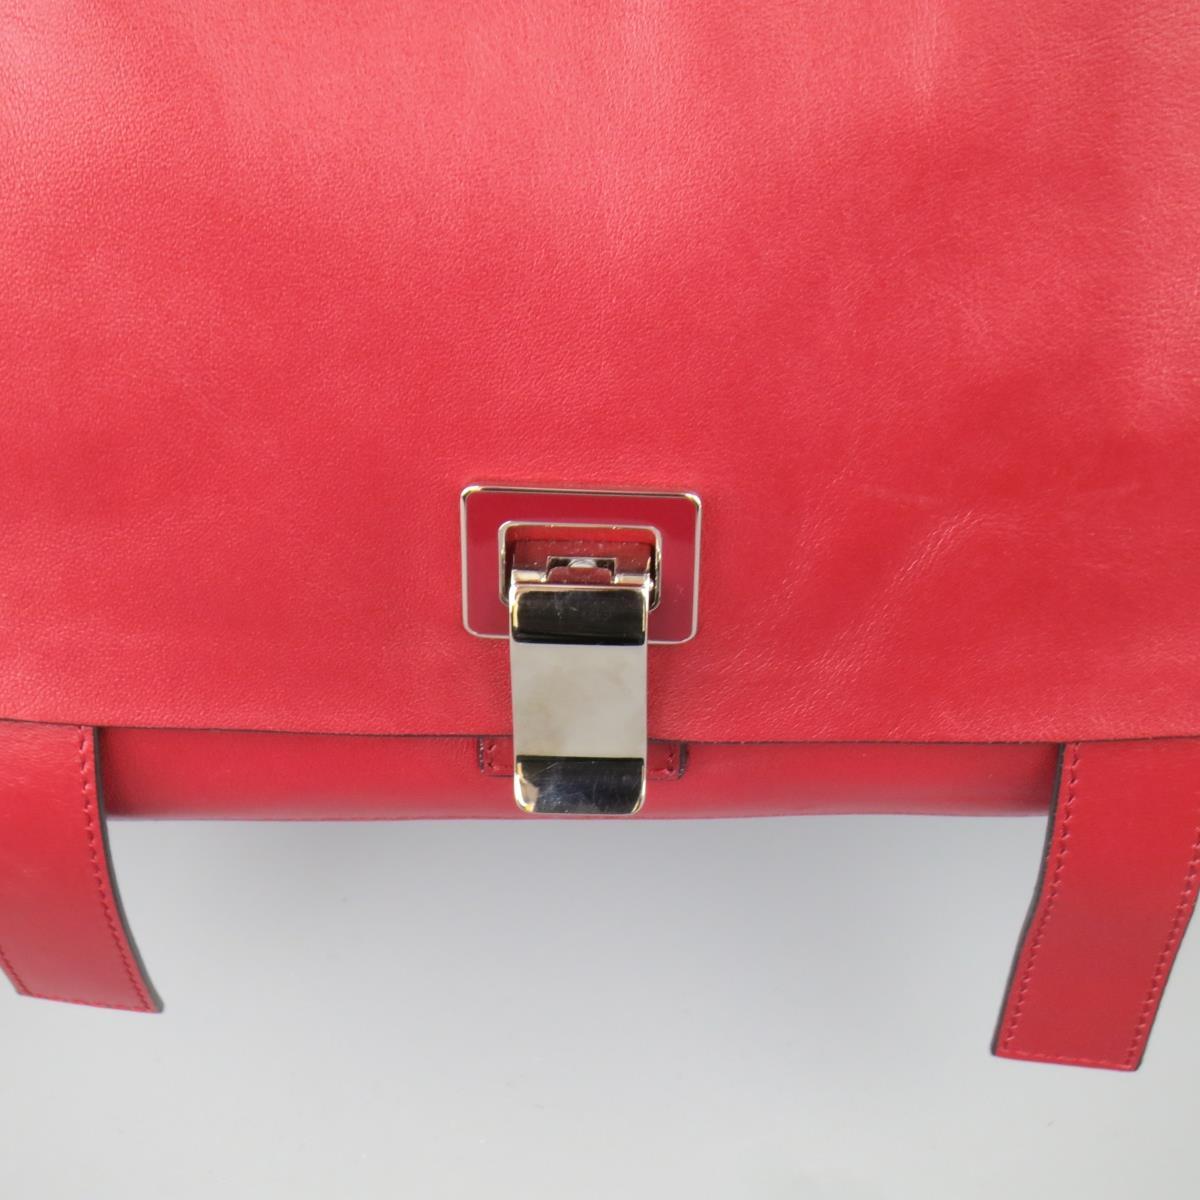 PROENZA SCHOULER Red & Blue Color Block Leather Shoulder Bag In Good Condition For Sale In San Francisco, CA